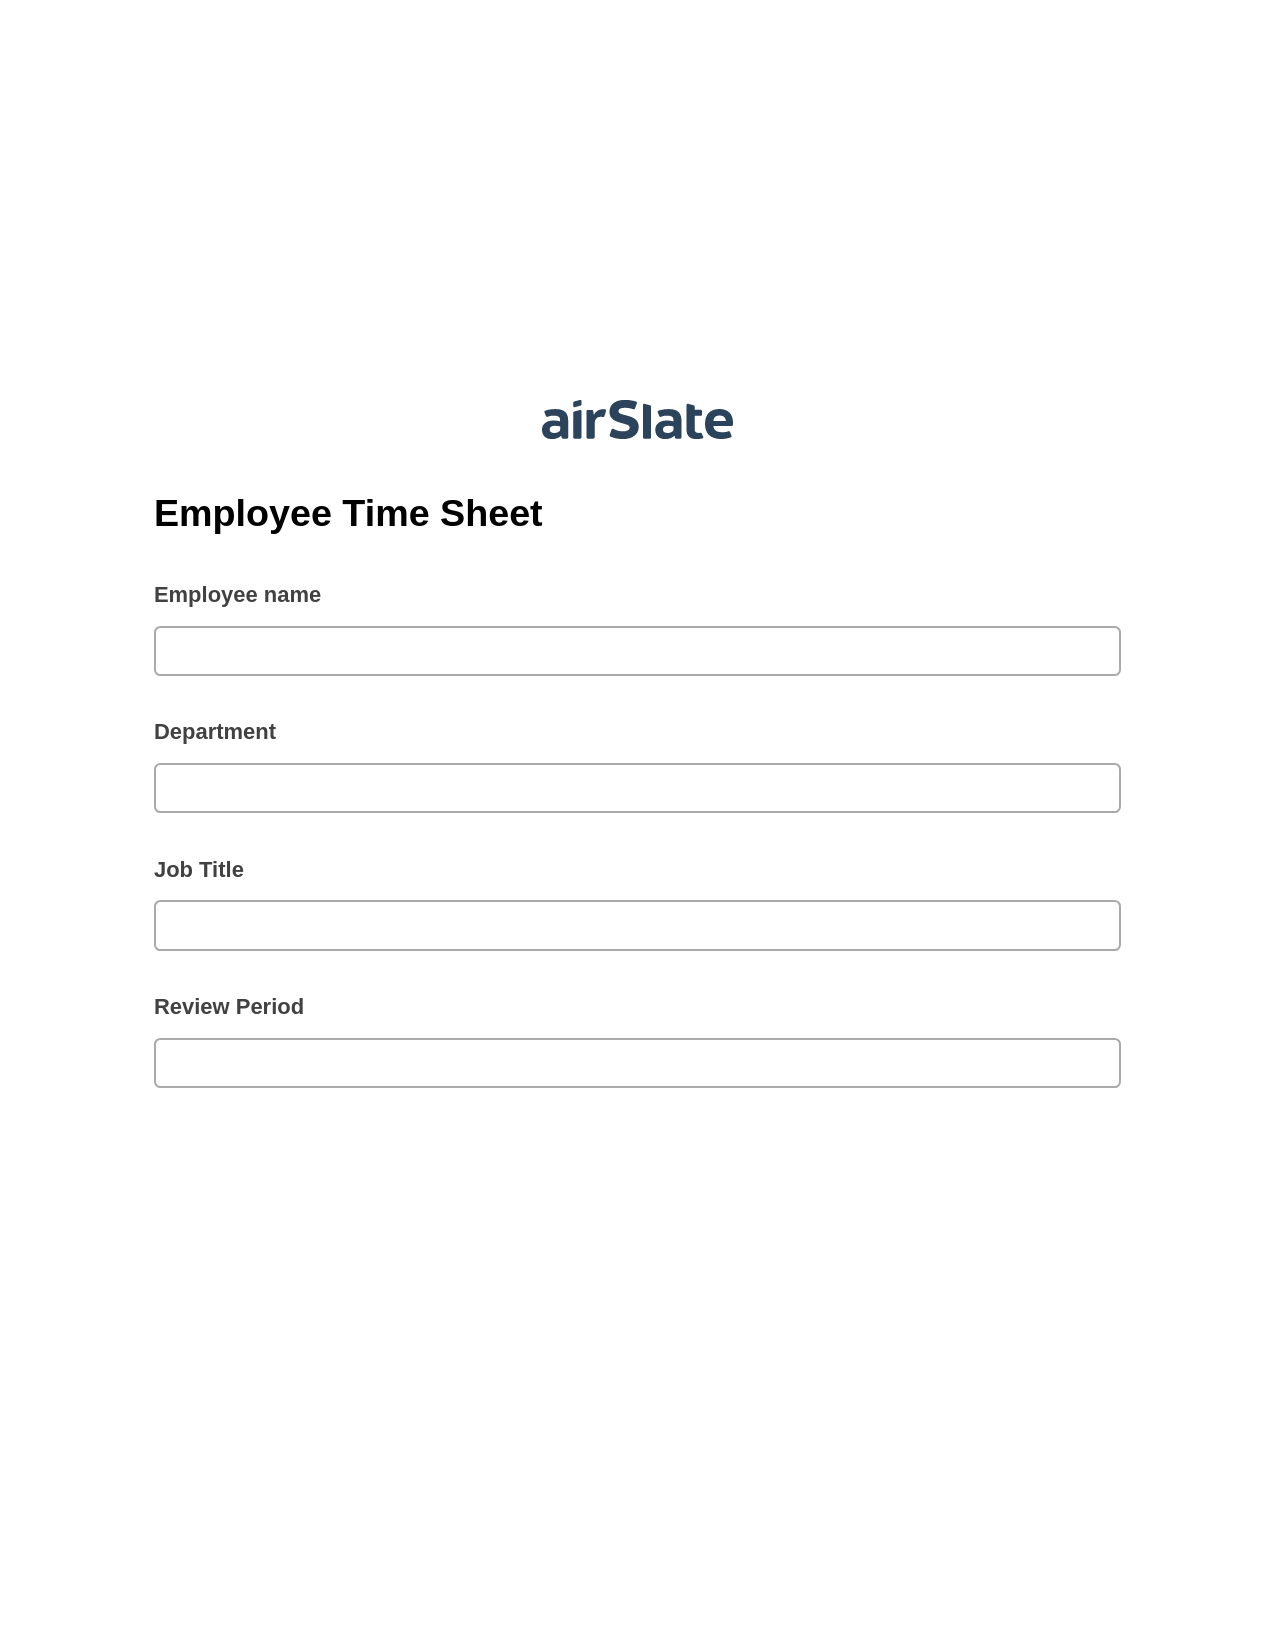 Multirole Employee Time Sheet Prefill from NetSuite records, Create Salesforce Records Bot, Archive to Google Drive Bot